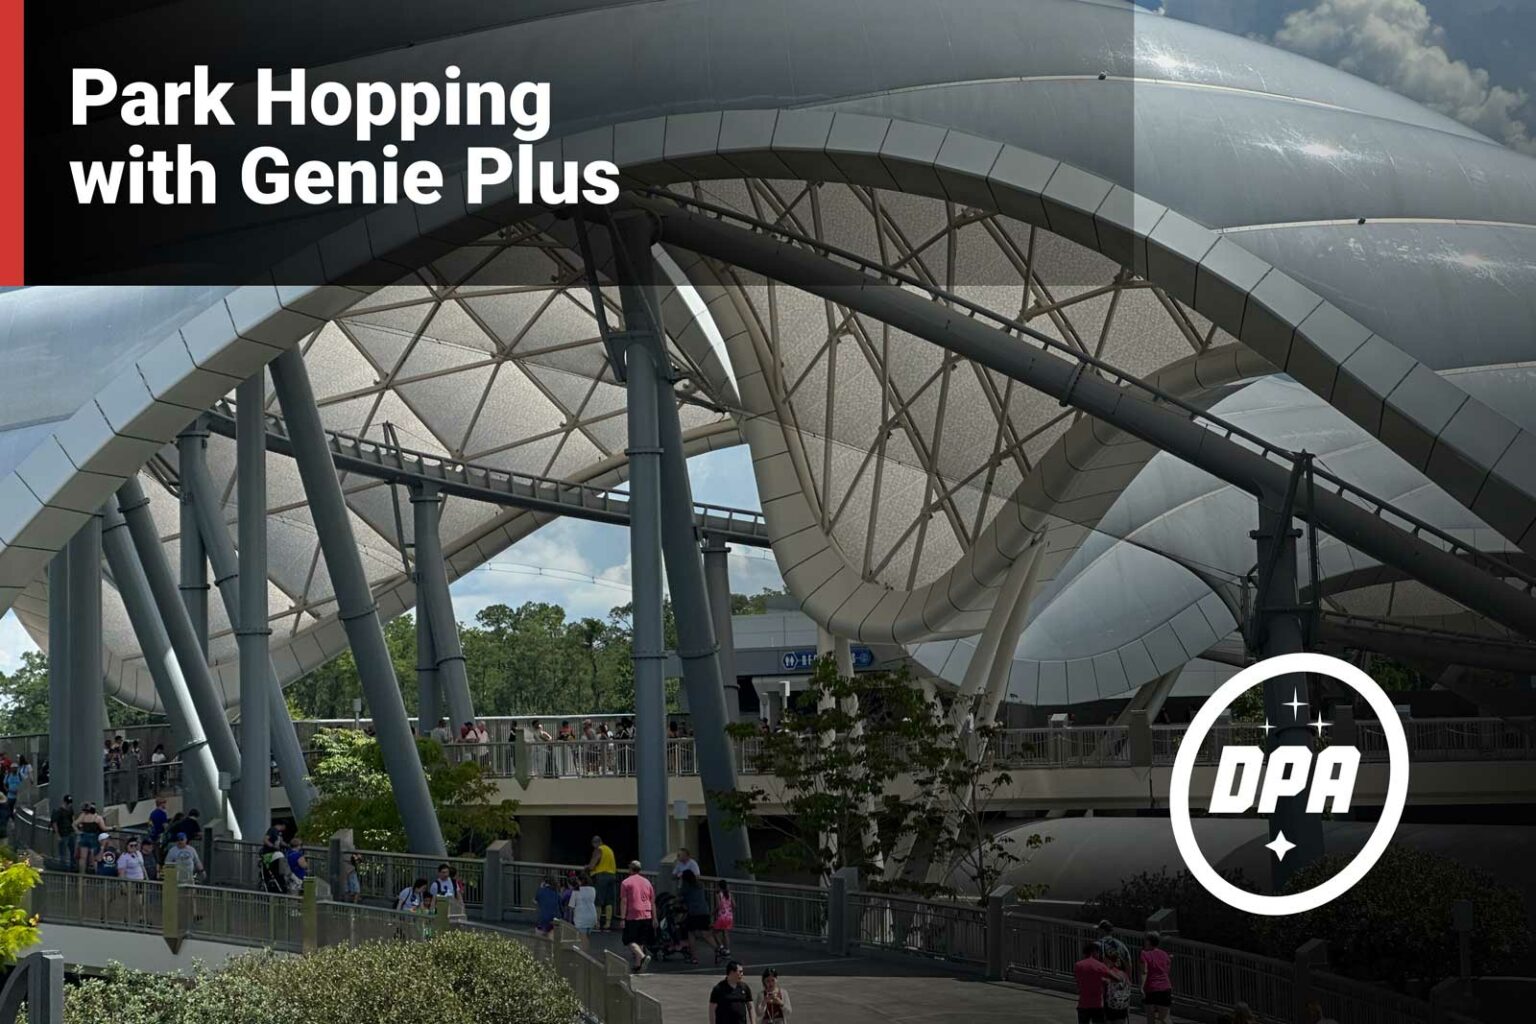 Park Hopping with Genie Plus